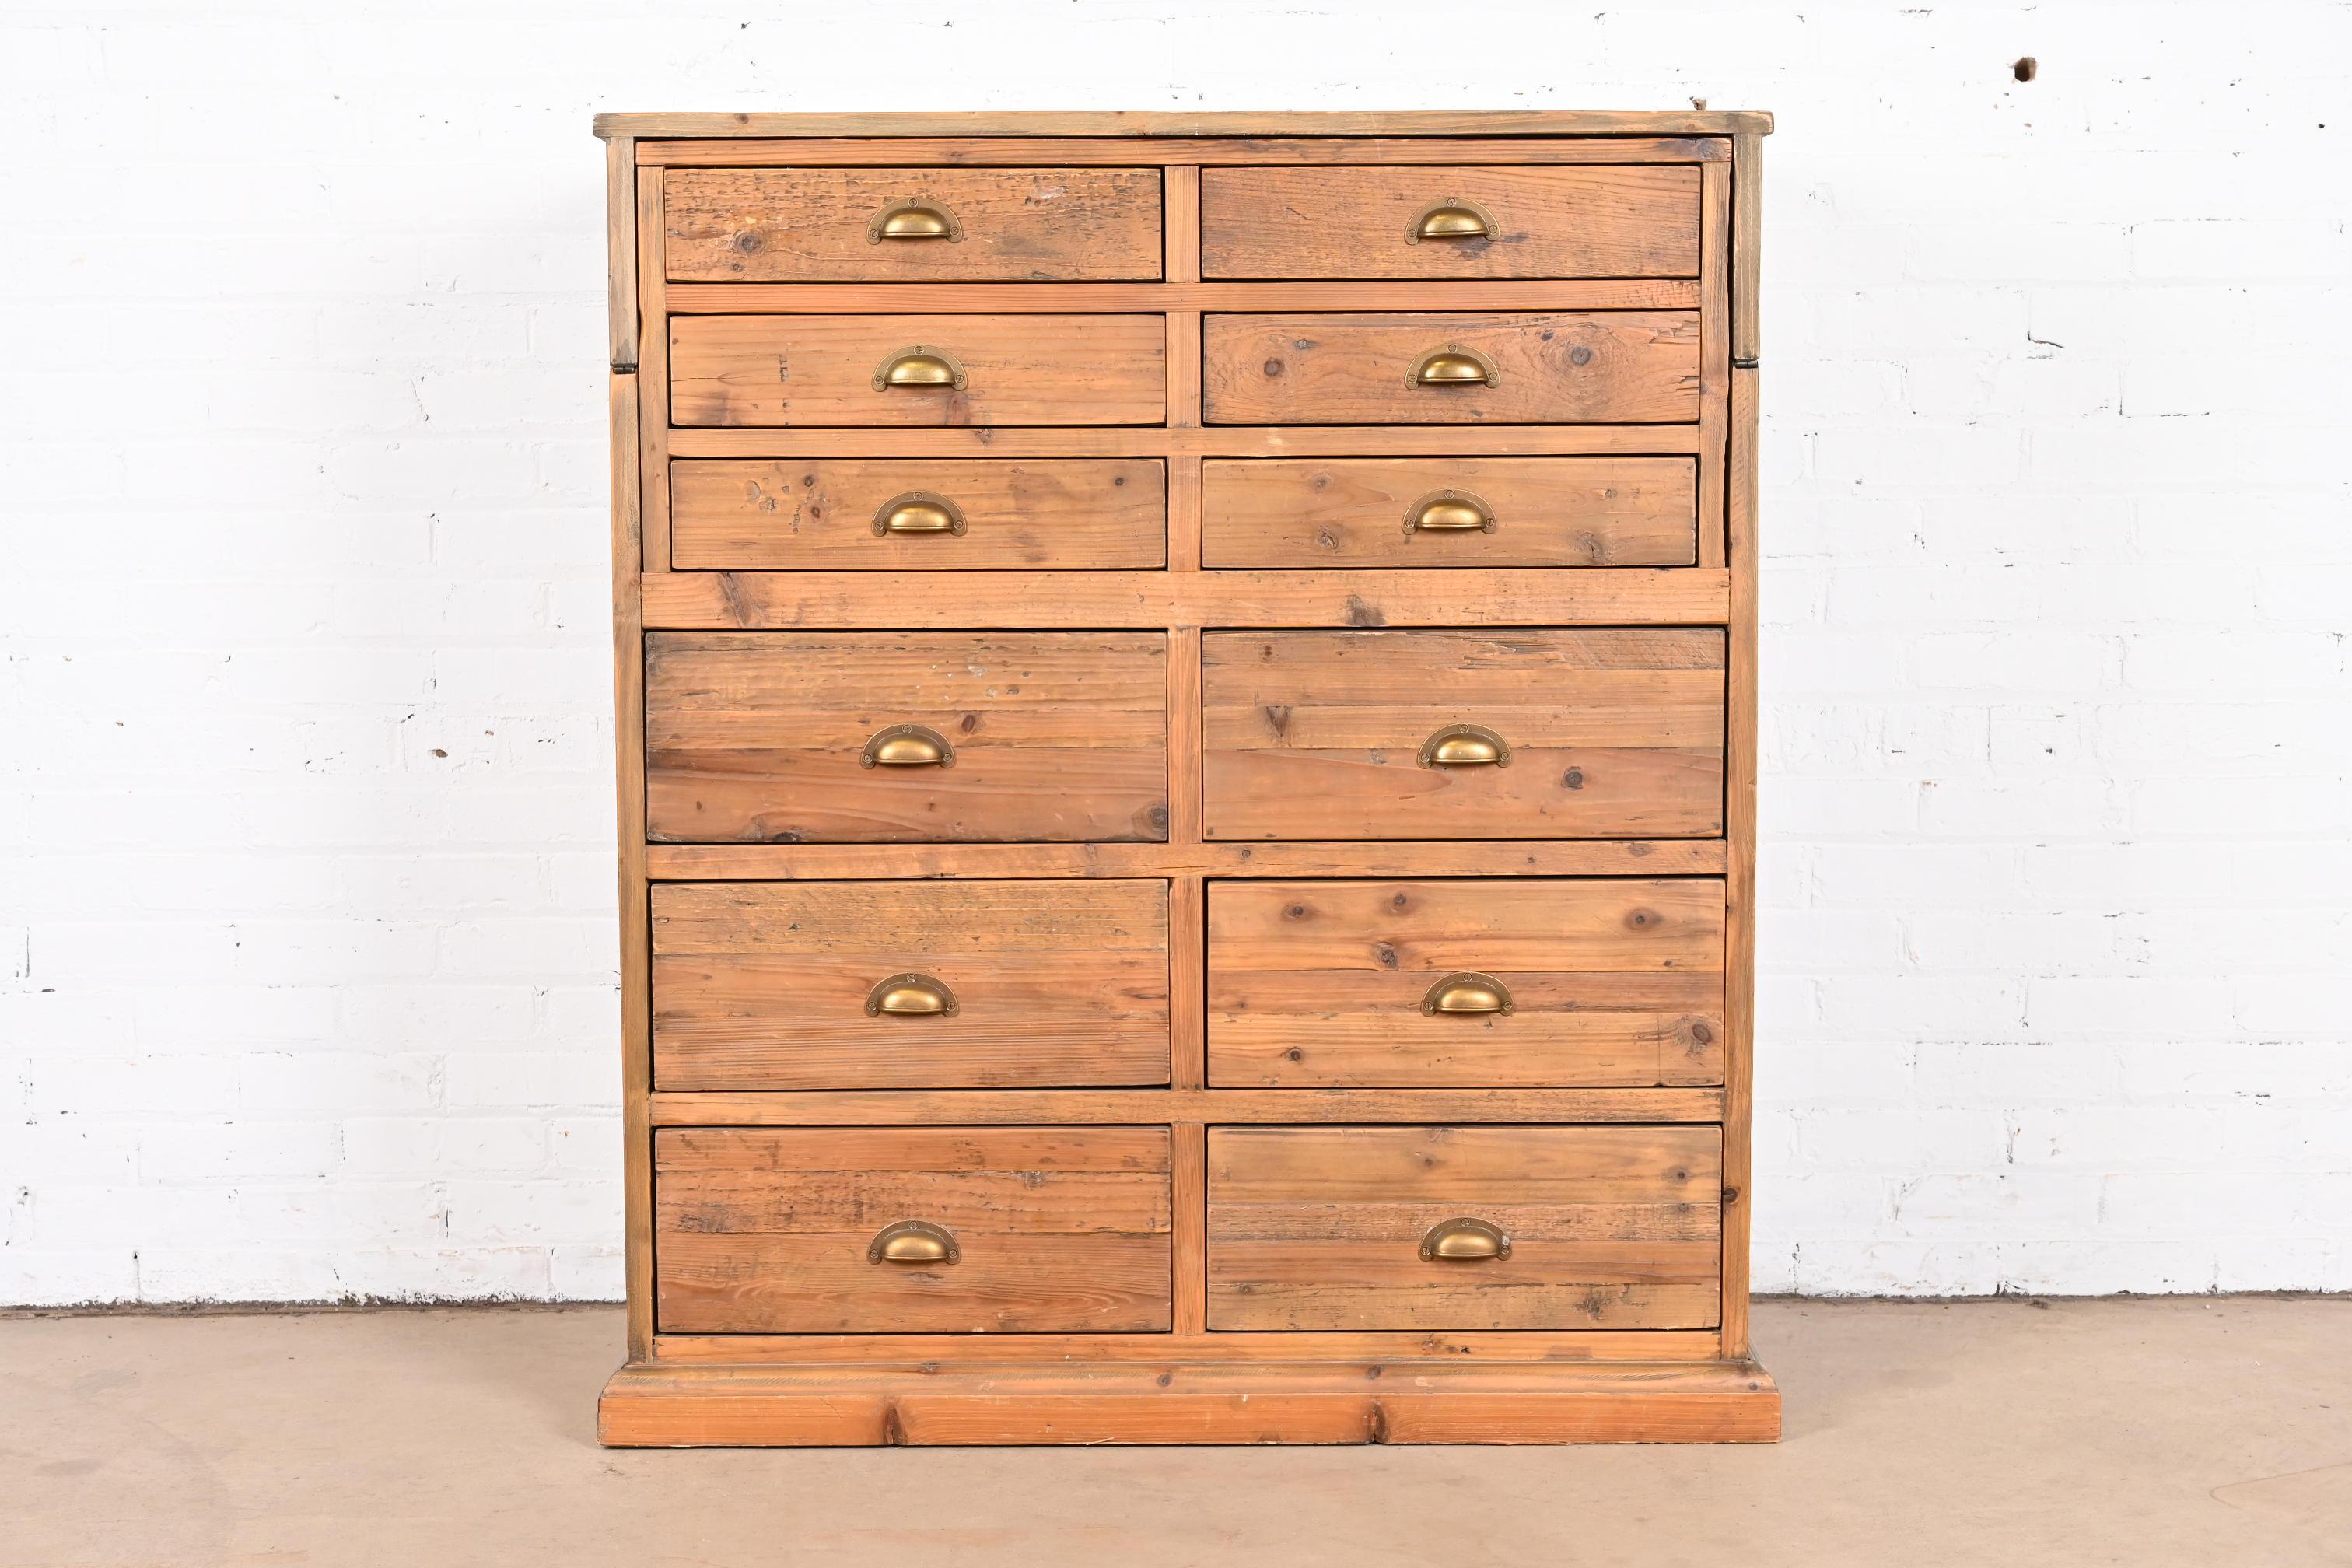 A fantastic 12-drawer file cabinet or apothecary cabinet with fold down desk or work station.

circa Late-20th century

Pine, with original brass hardware.

Measures: 41.25